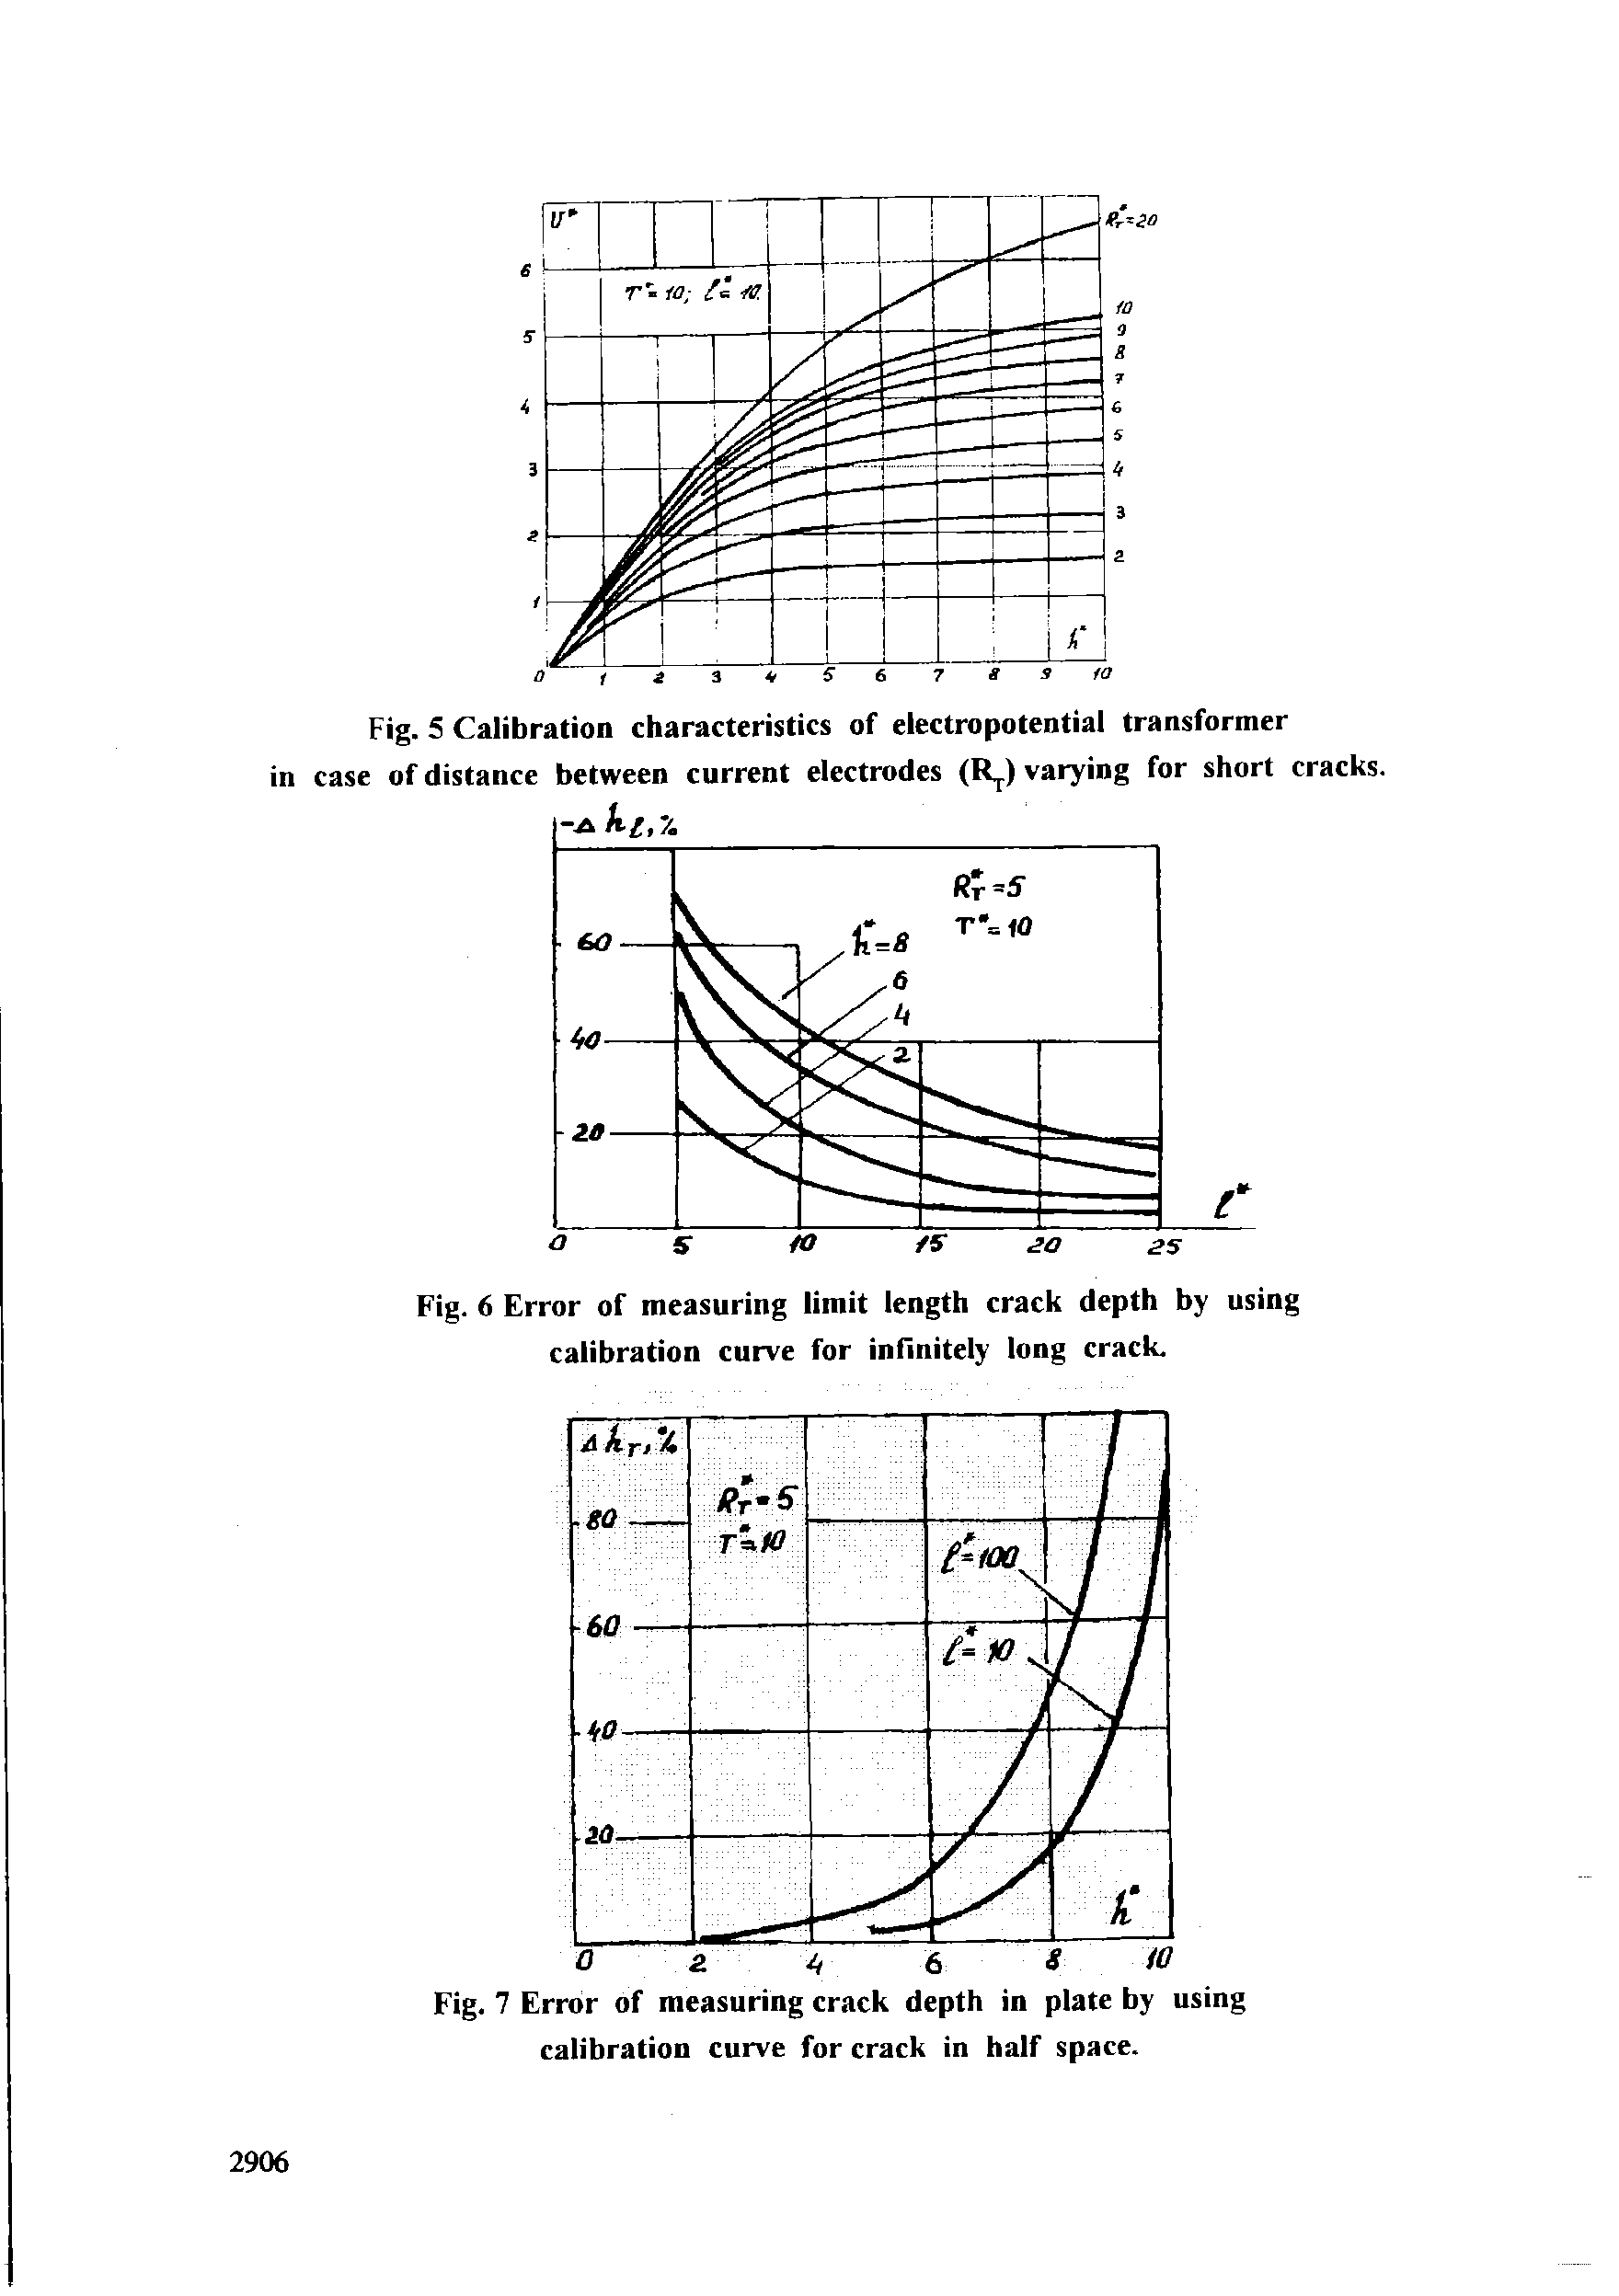 Fig. 5 Calibration characteristics of electropotential transformer in case of distance between current electrodes (Rj.) varying for short cracks.